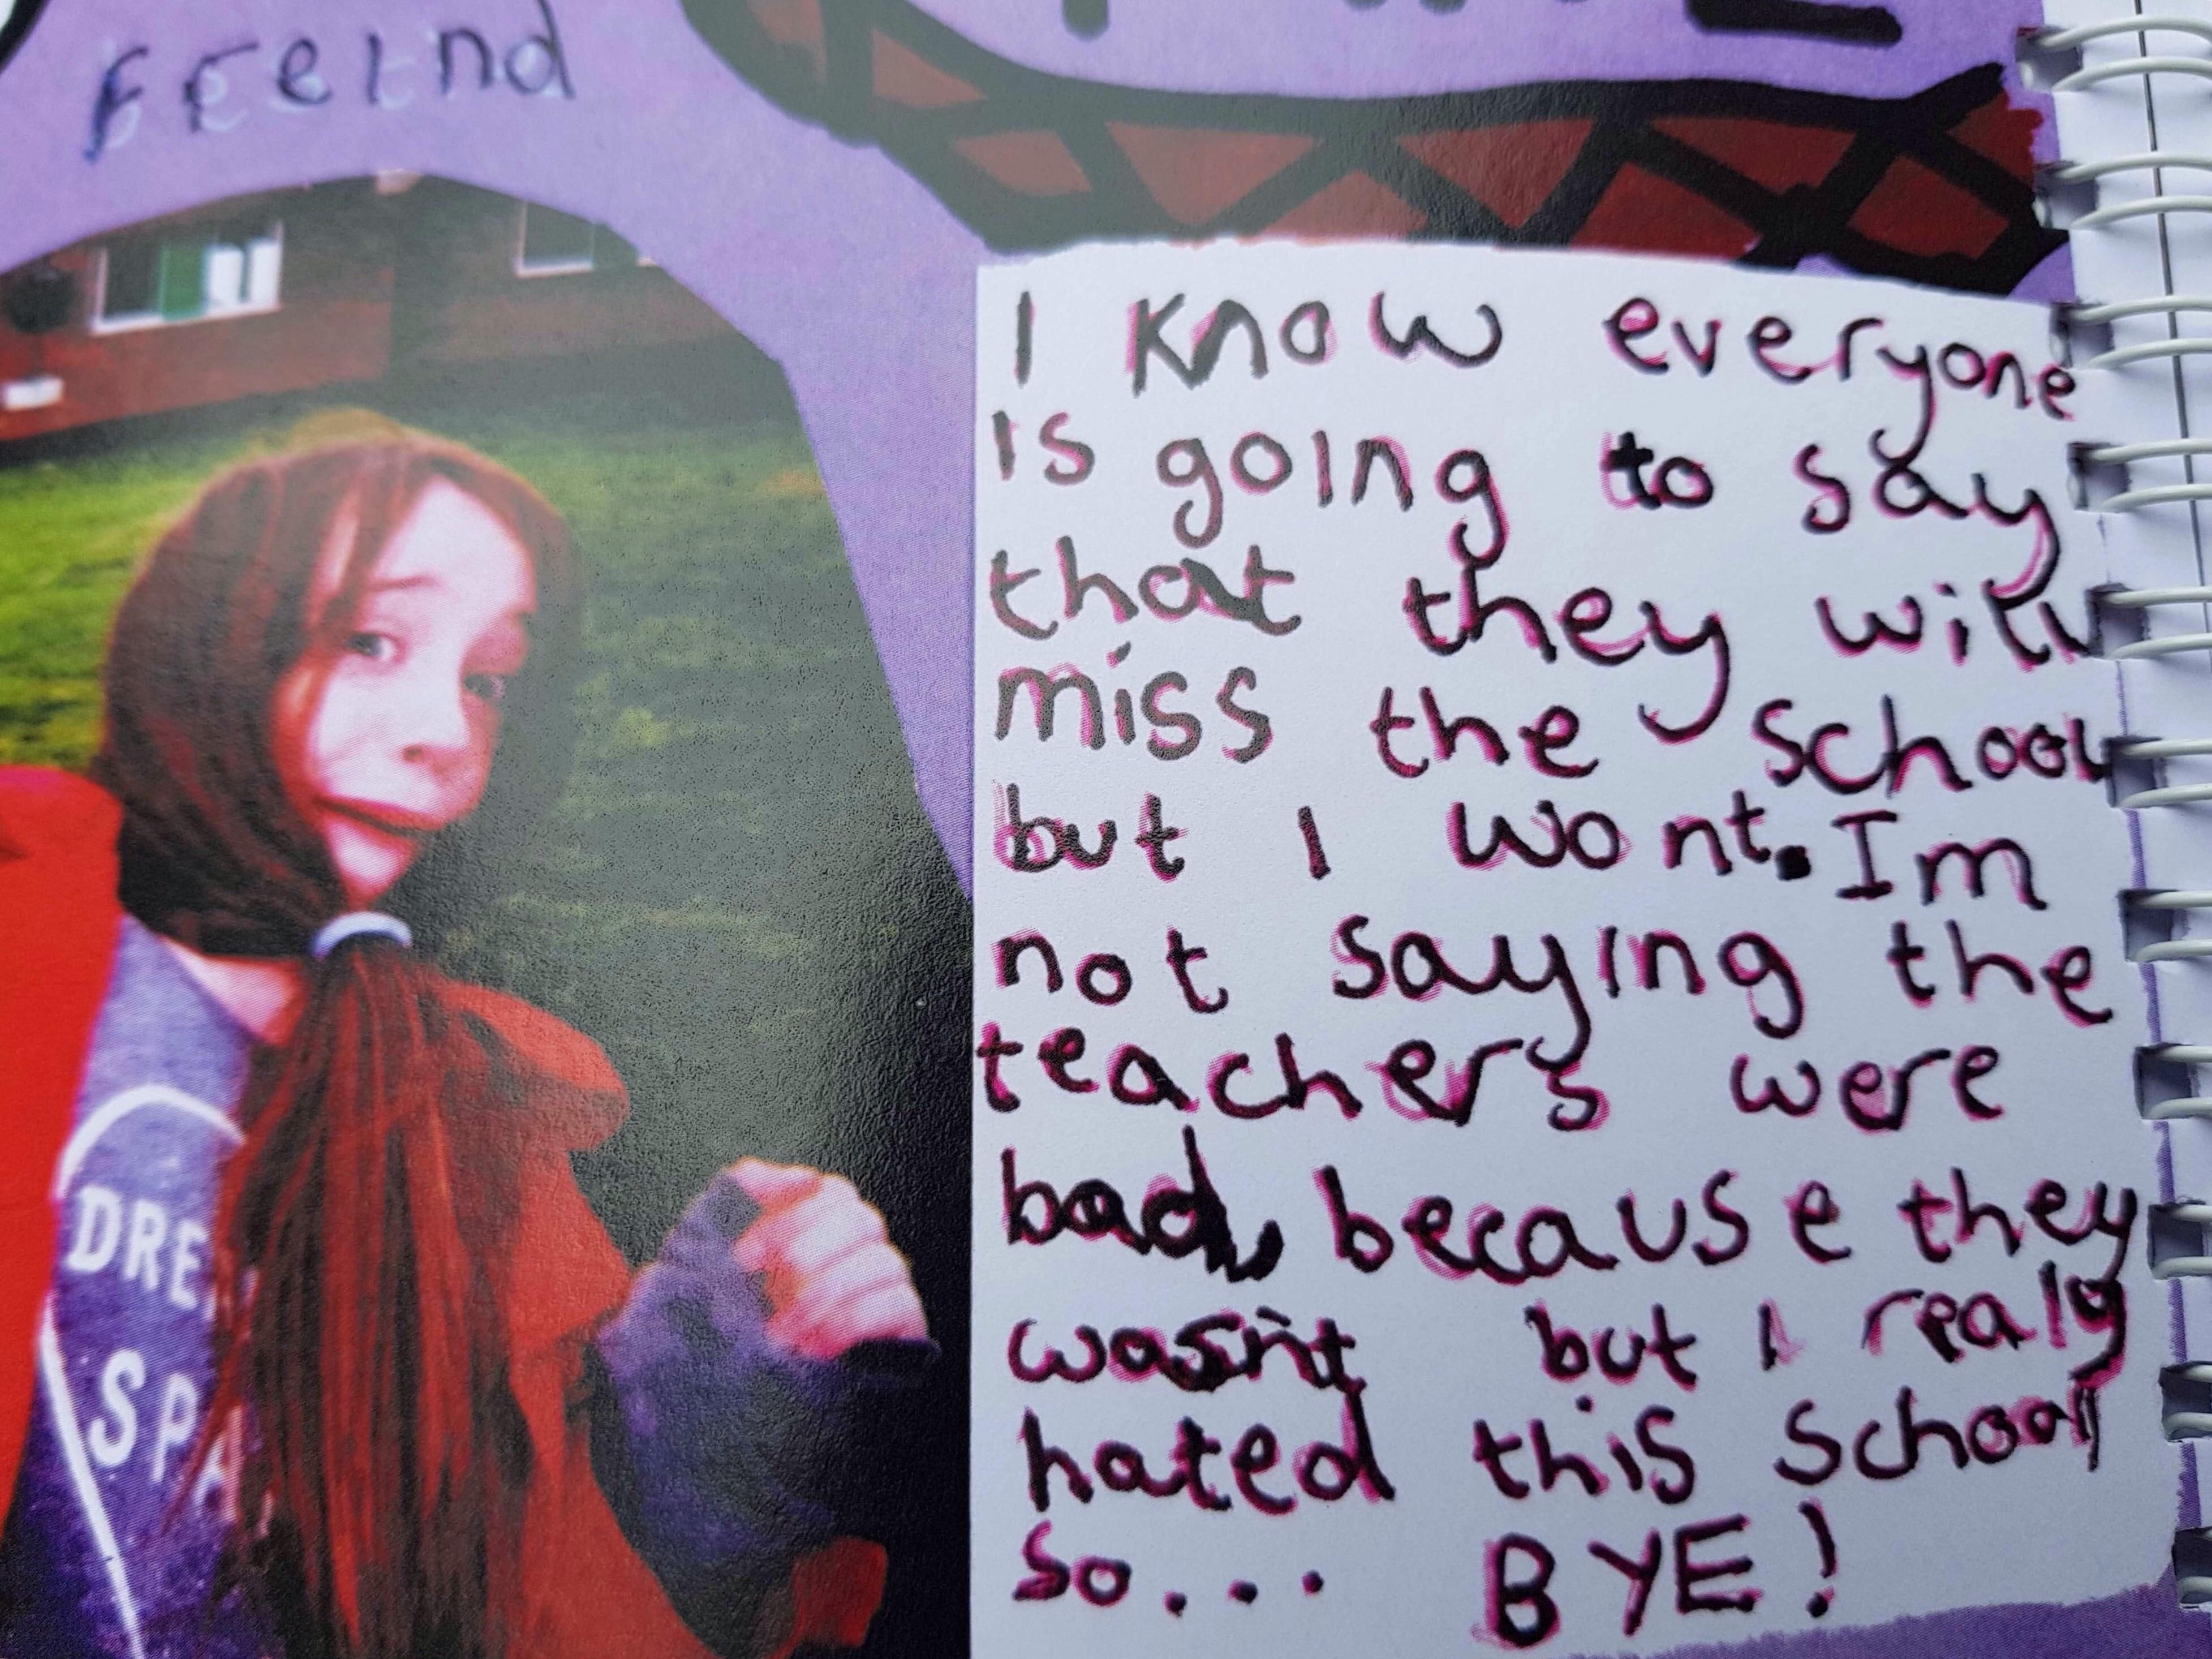 My little sister's farewell message in her school's yearbook